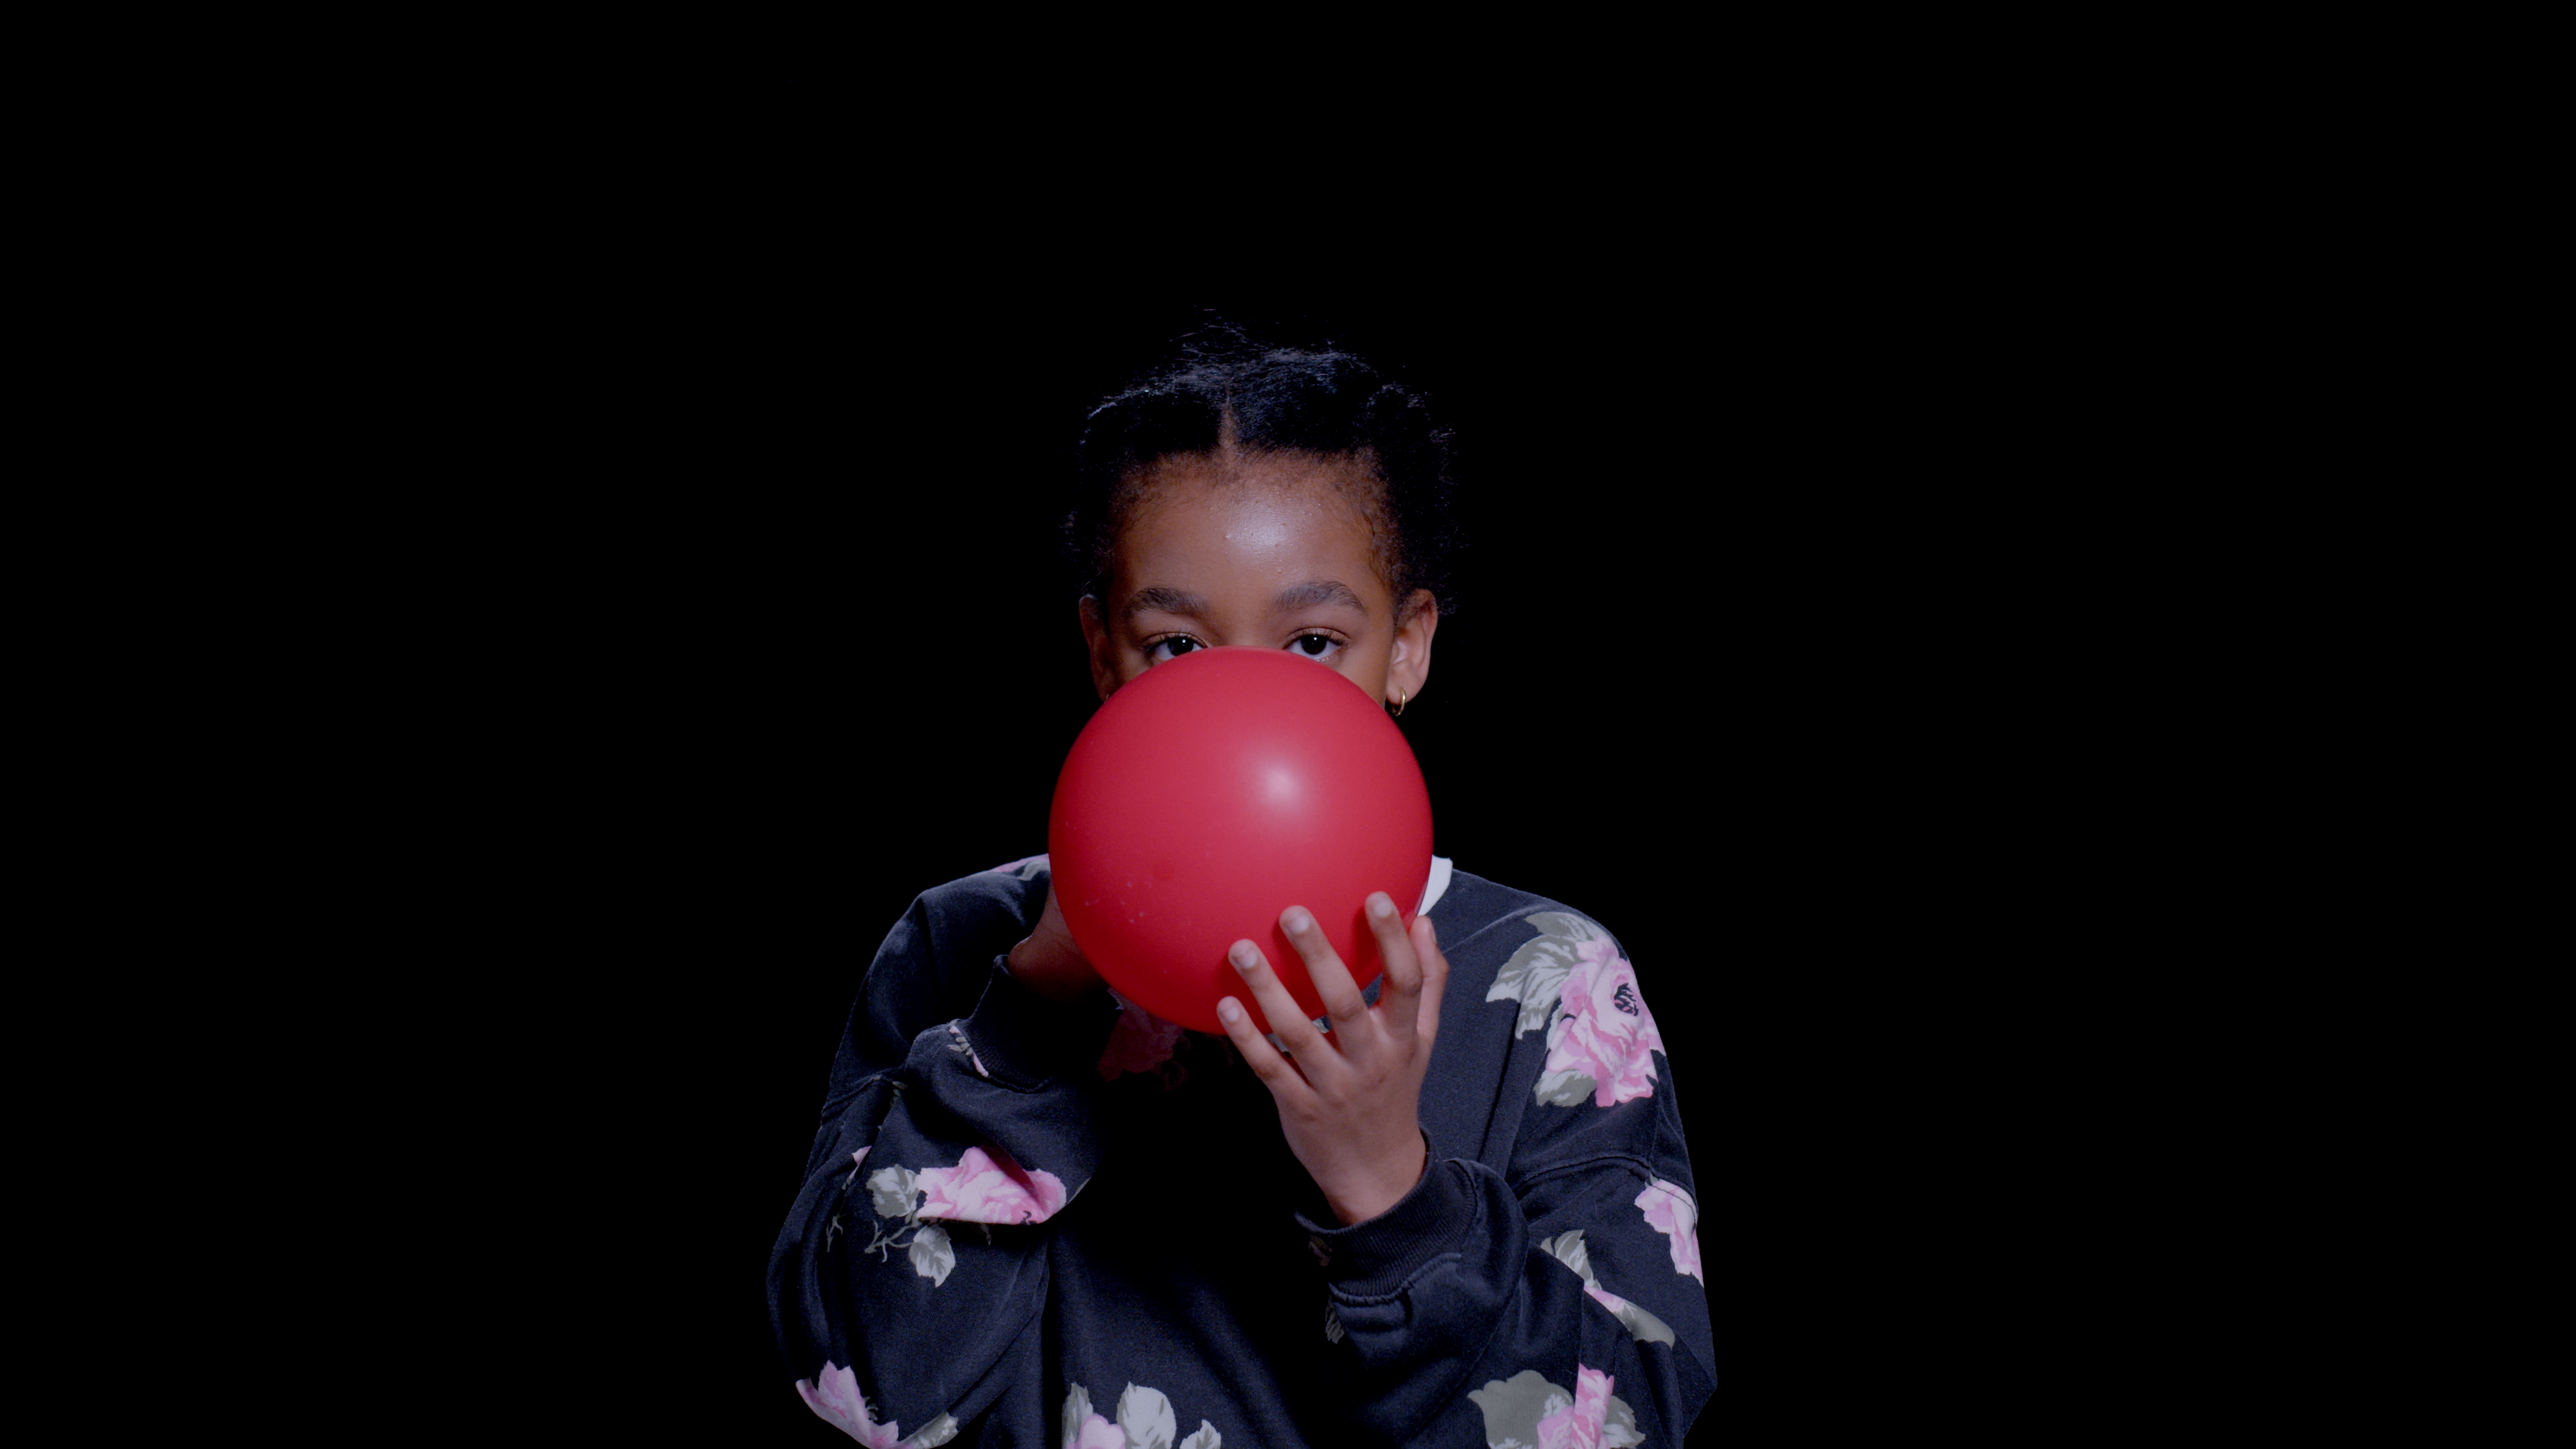 A young black girl in a sweater inflates a red balloon as she stares into the camera.